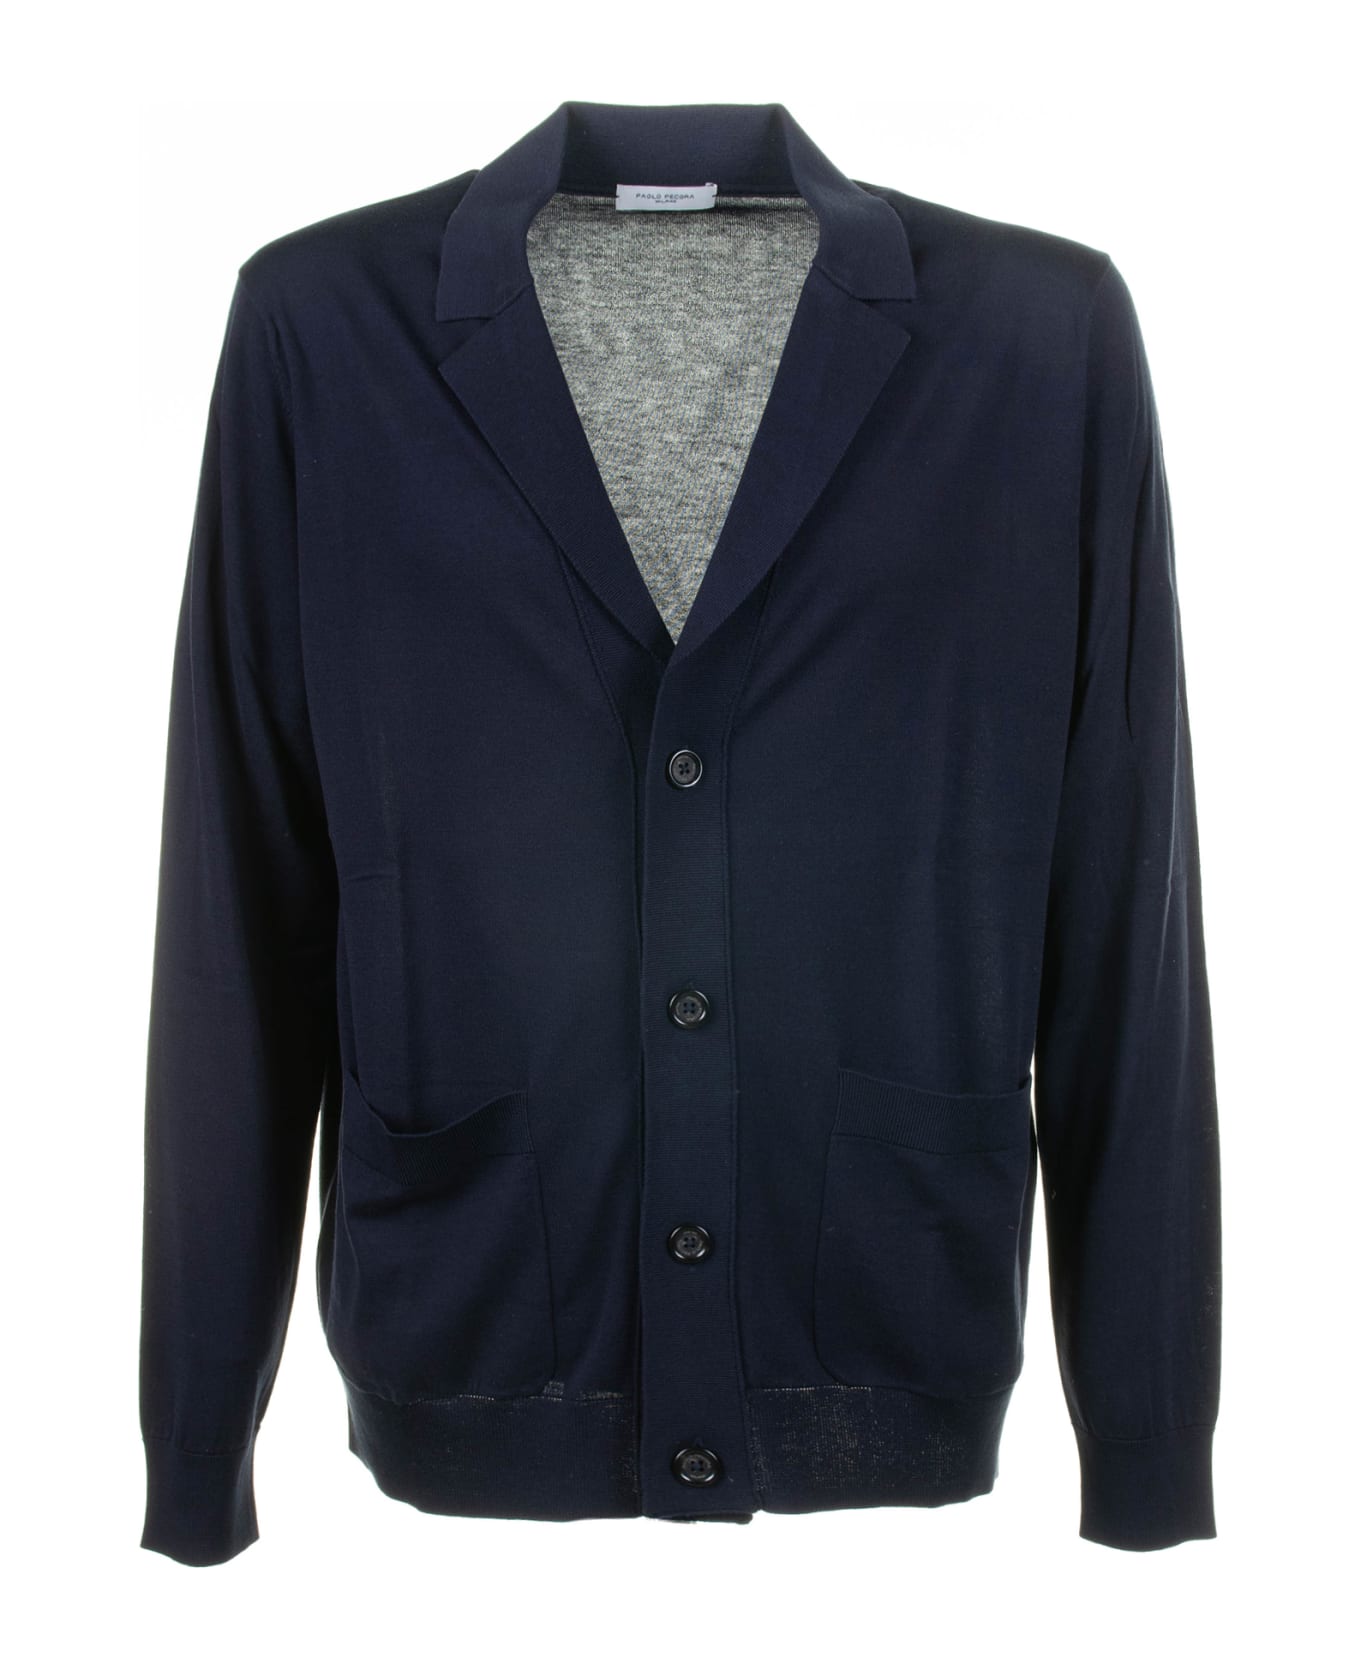 Paolo Pecora Blue Cardigan With Pockets And Buttons - Blu